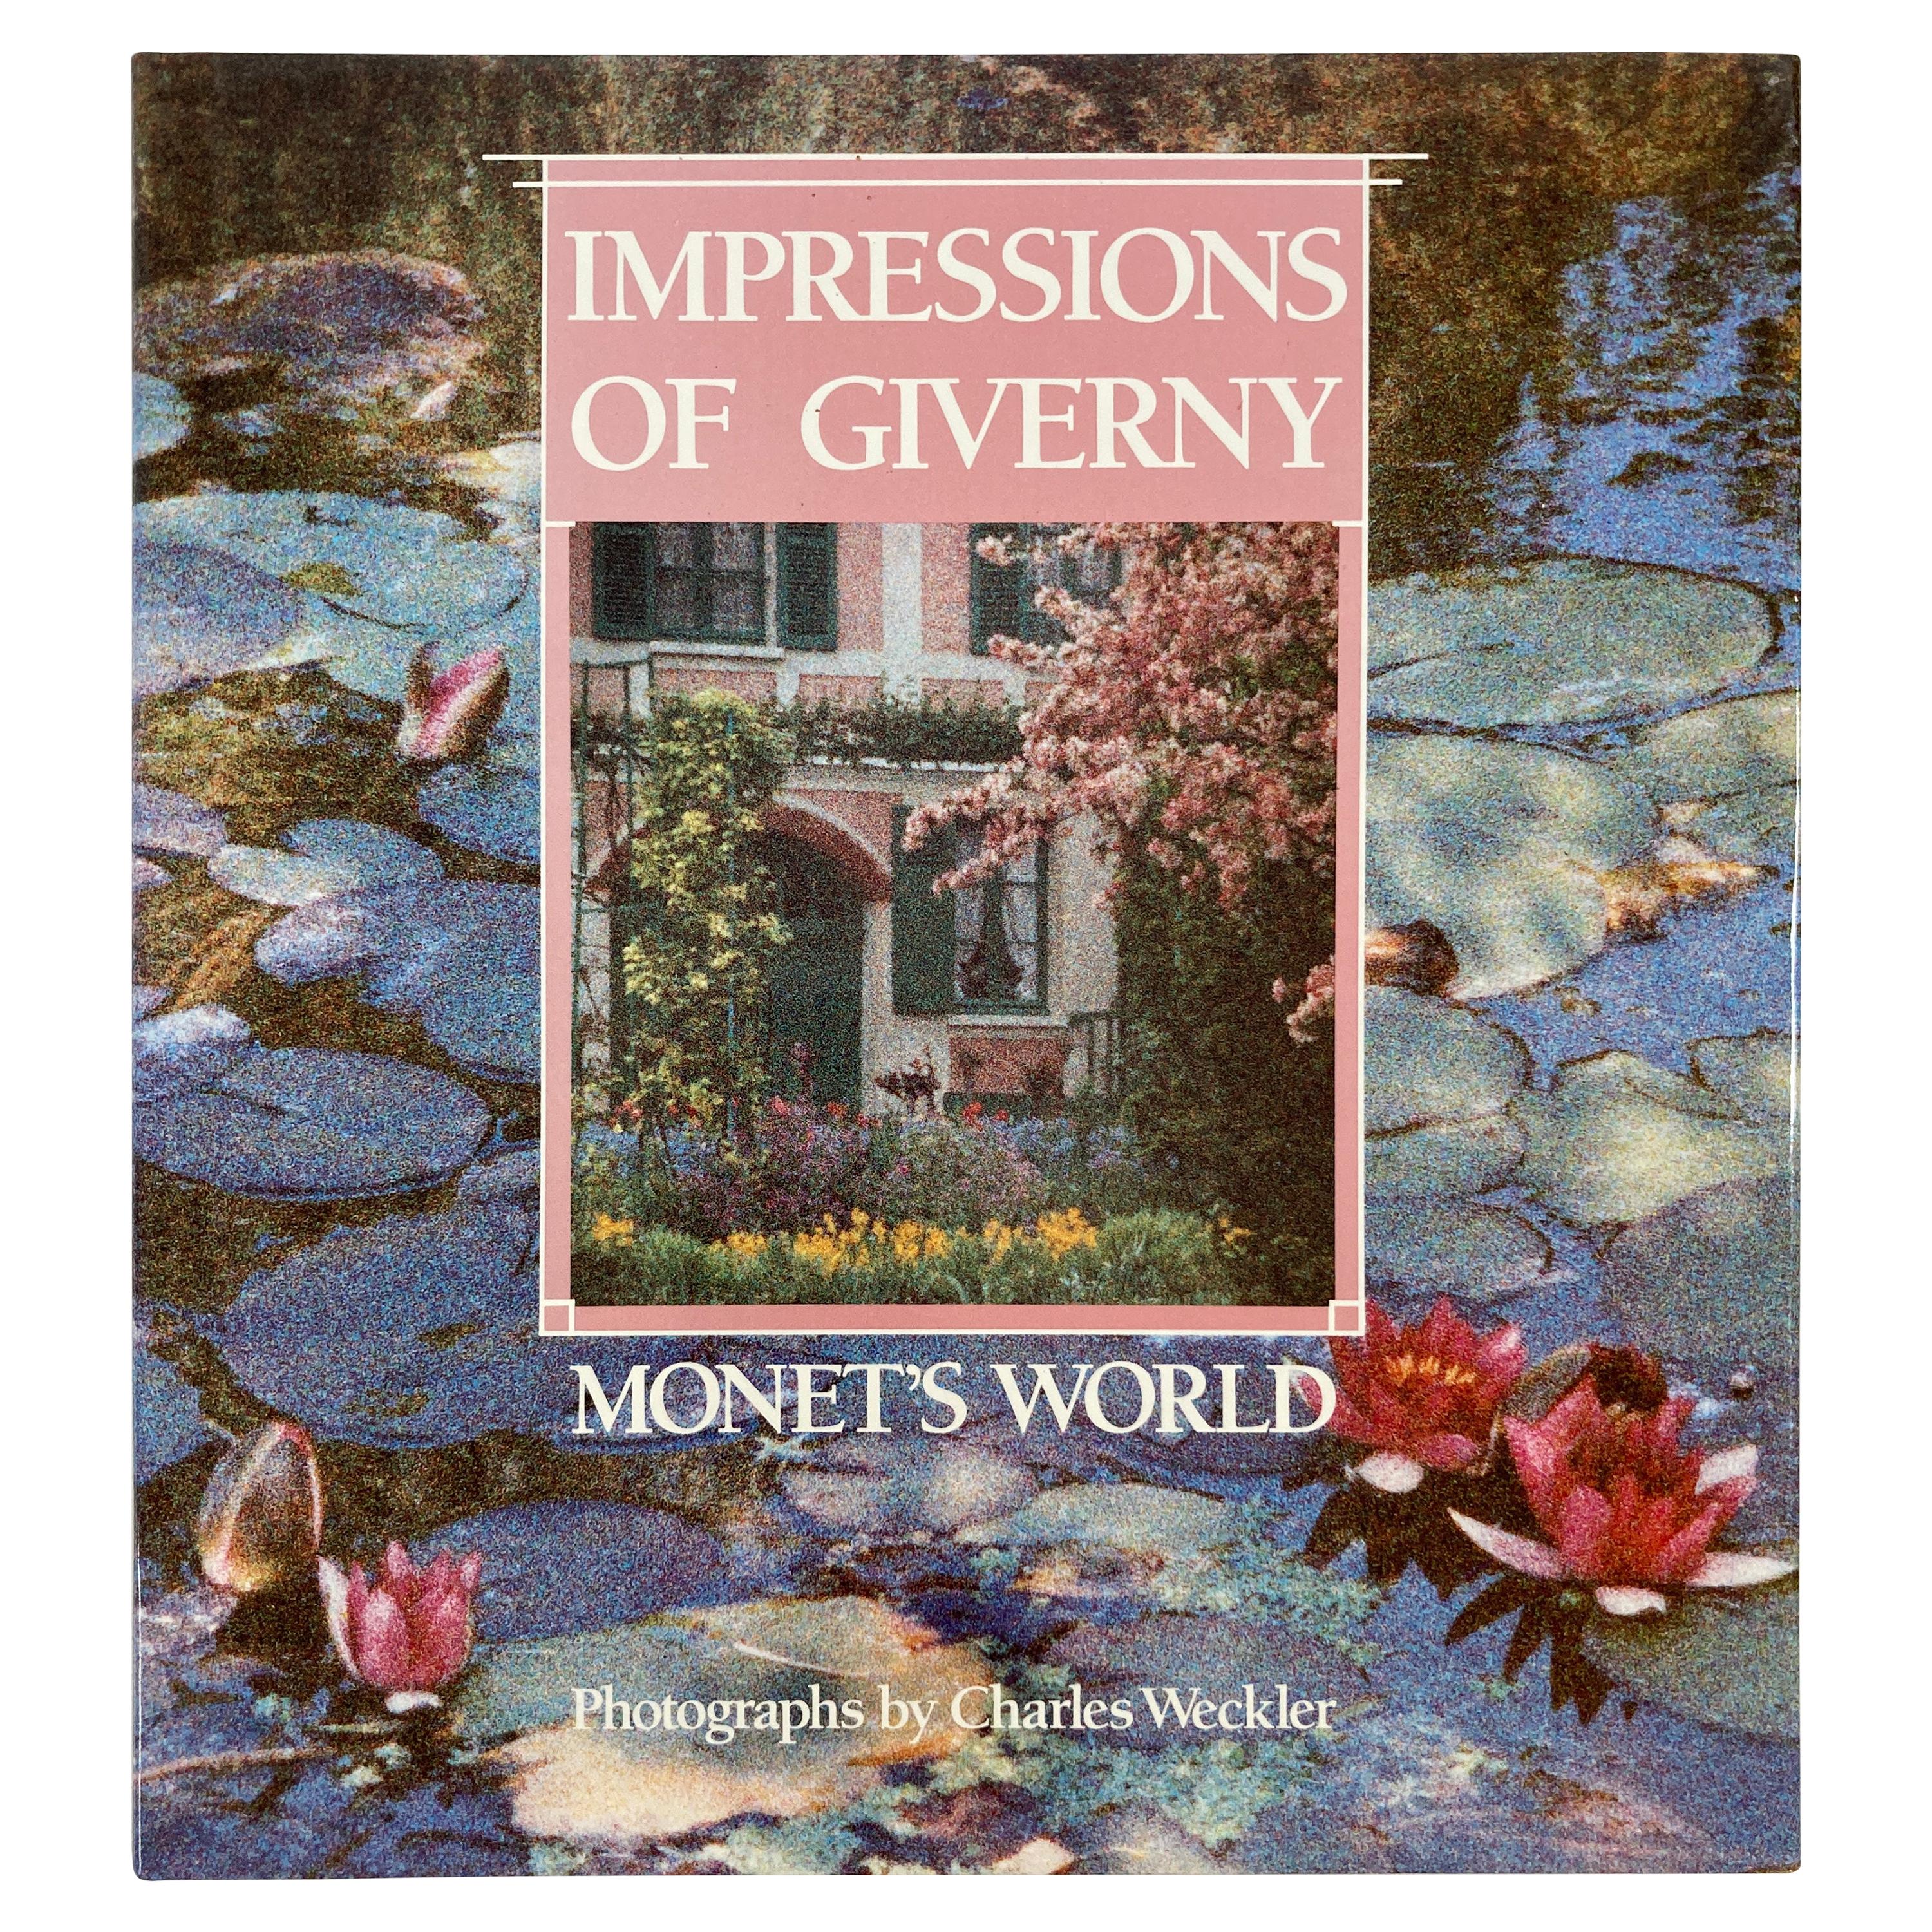 Impressions of Giverny Monet's World Charles Weckler Hardcover Book For Sale